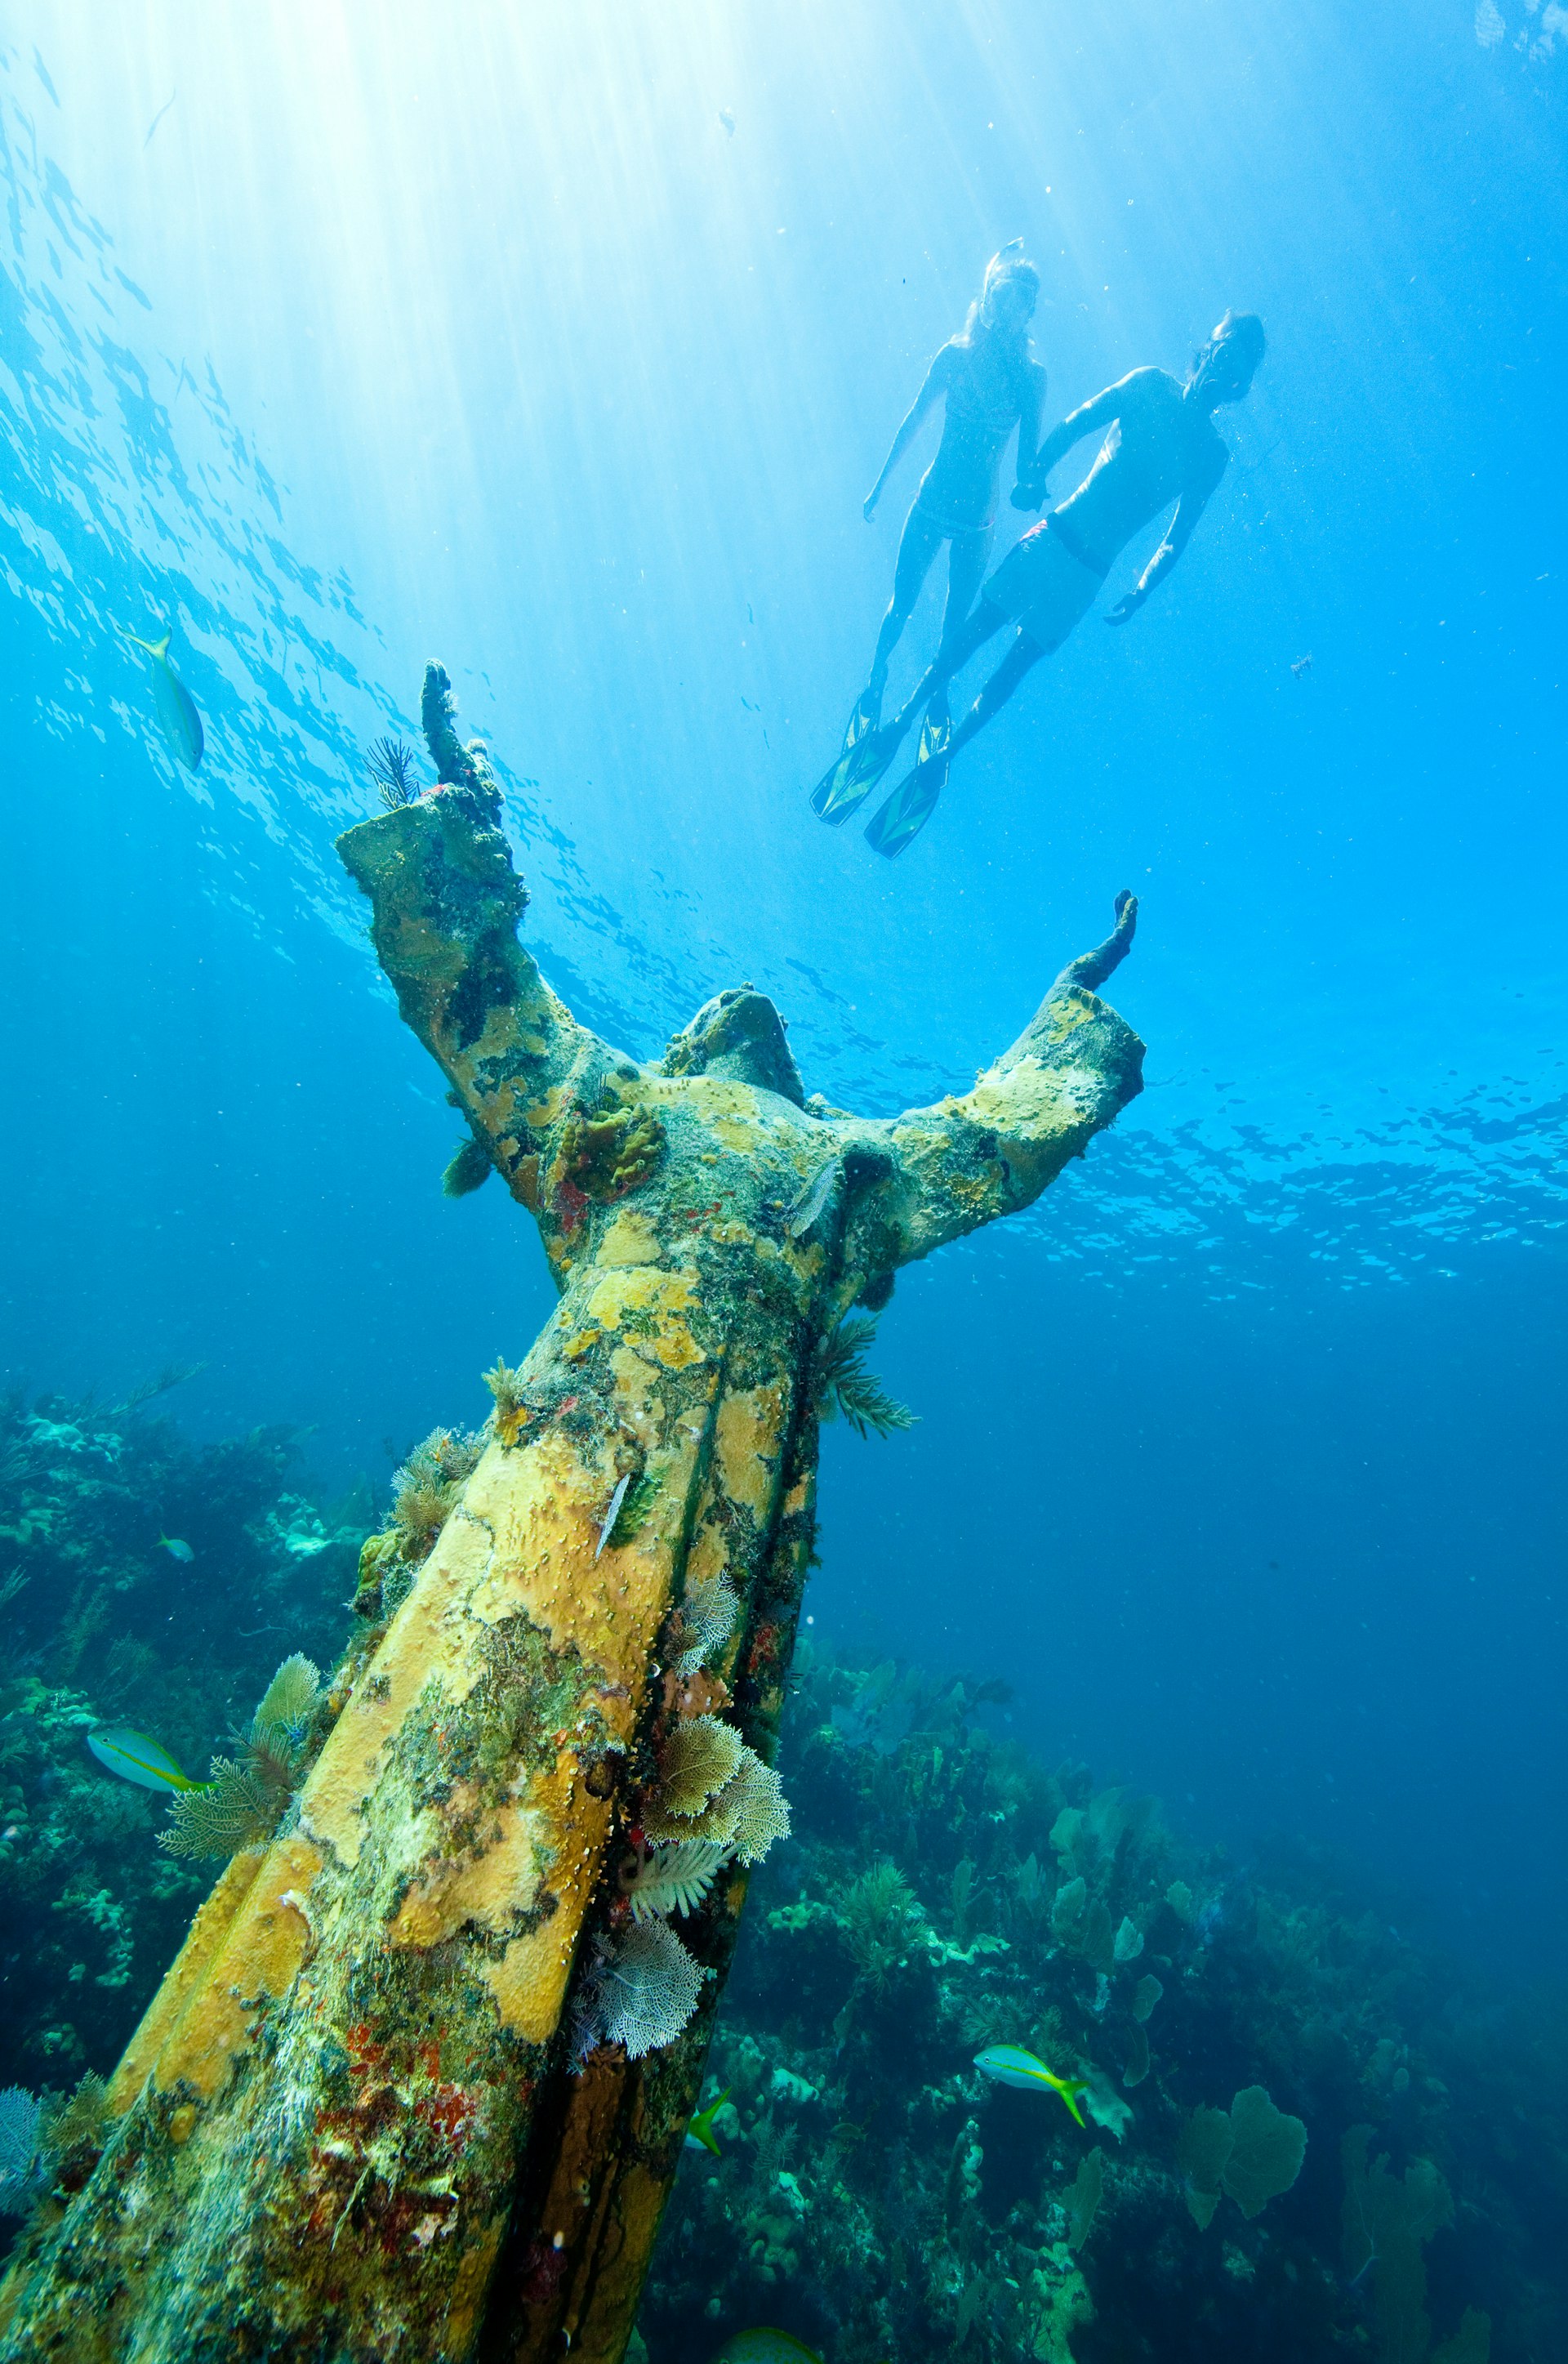 Diver swim above the Christ of the Abyss statue at John Pennekamp Coral Reef State Park in Key Largo, Florida